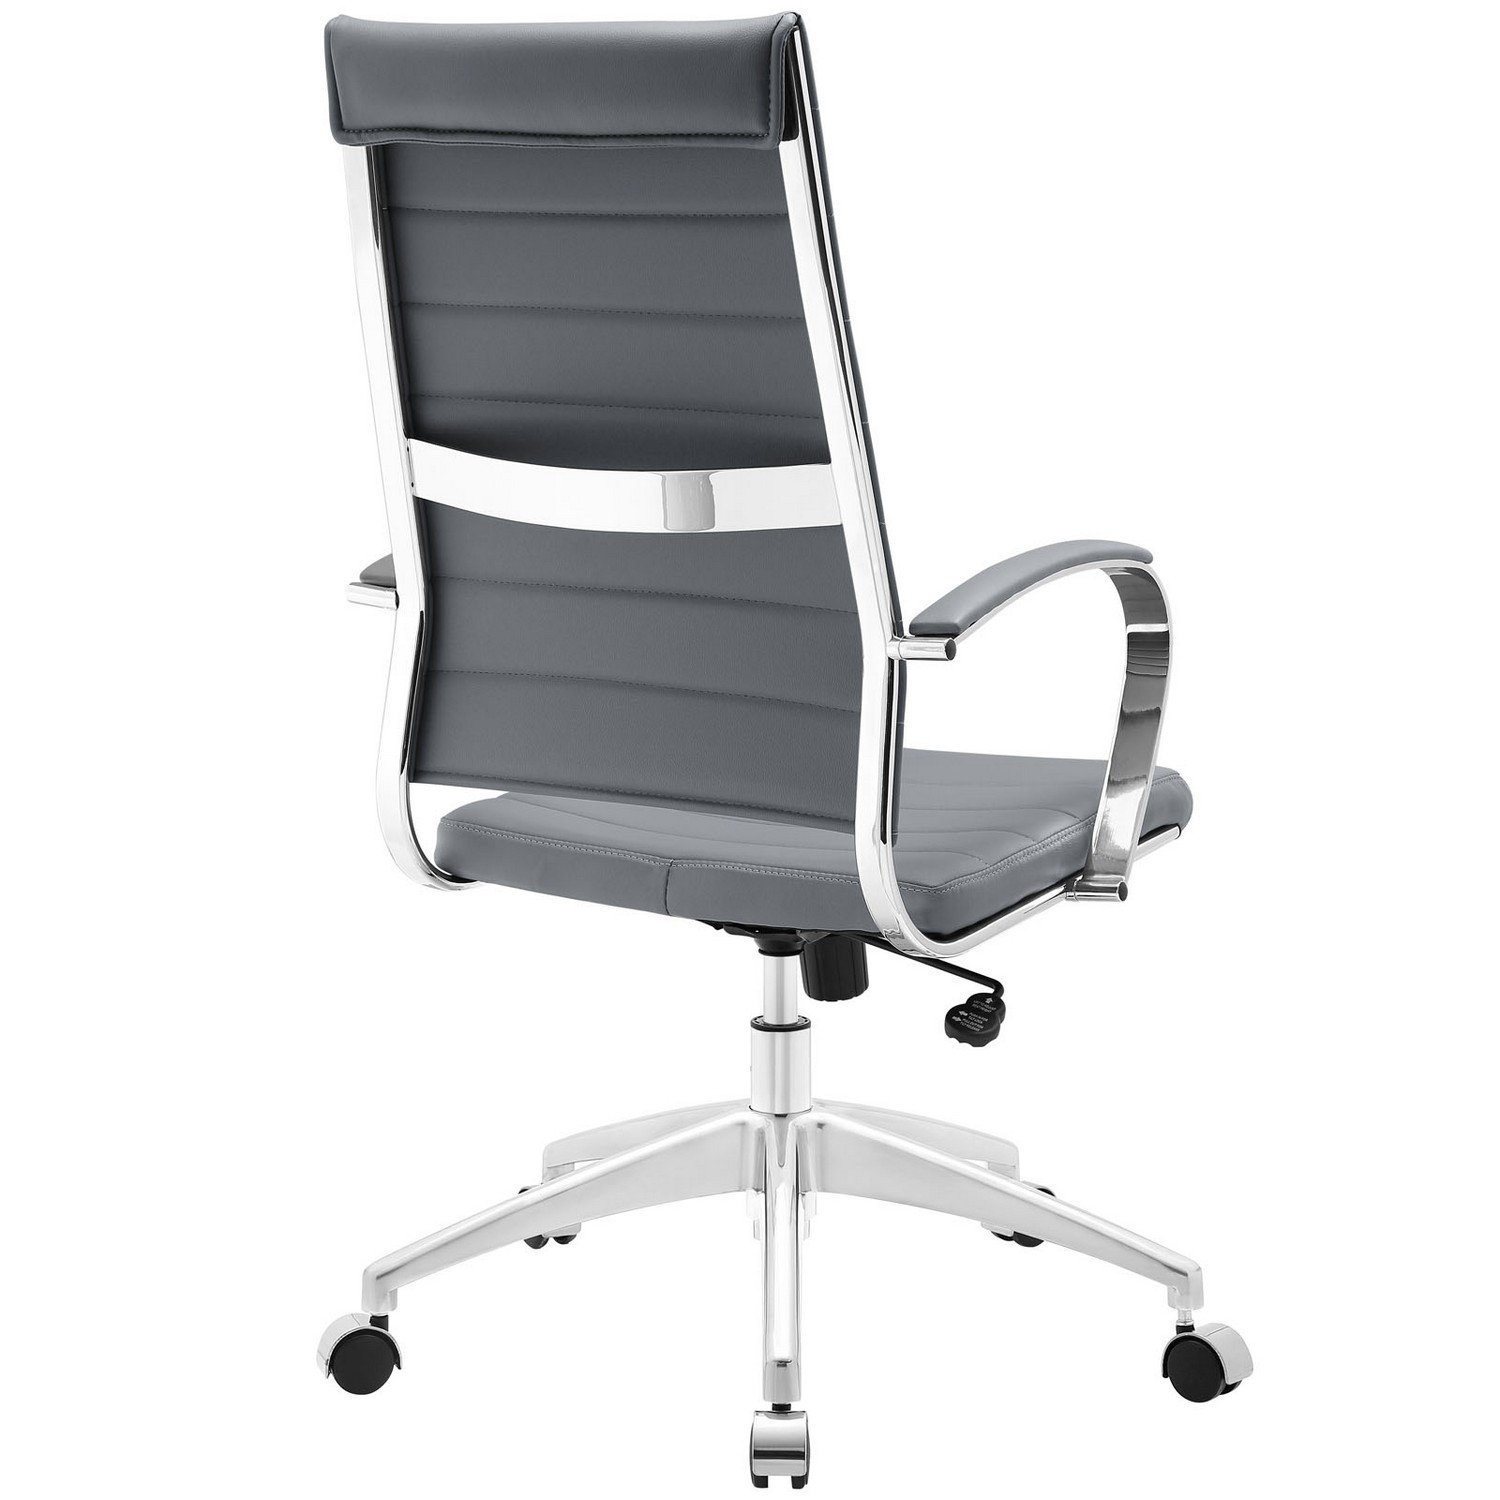 Modway Jive Highback Office Chair - Gray